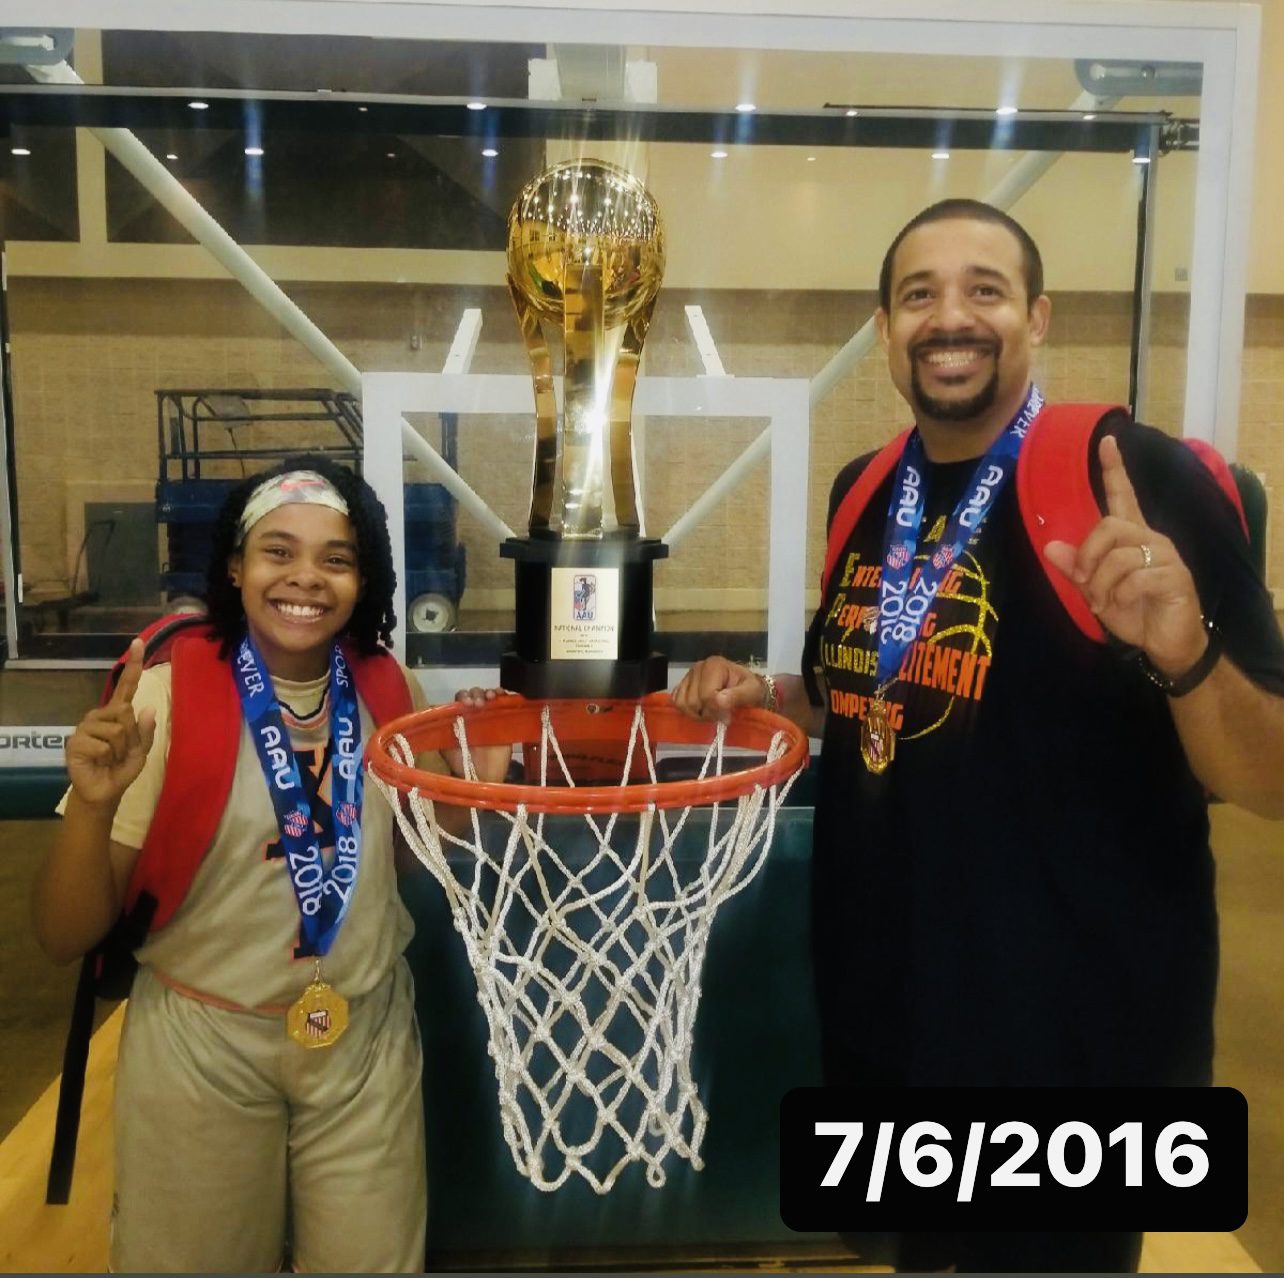 Photo shows Xamiya and her dad, smiling, and holding a giant trophy on top of a basketball hoop for the national championship that Xamiya's team won in 6th grade.